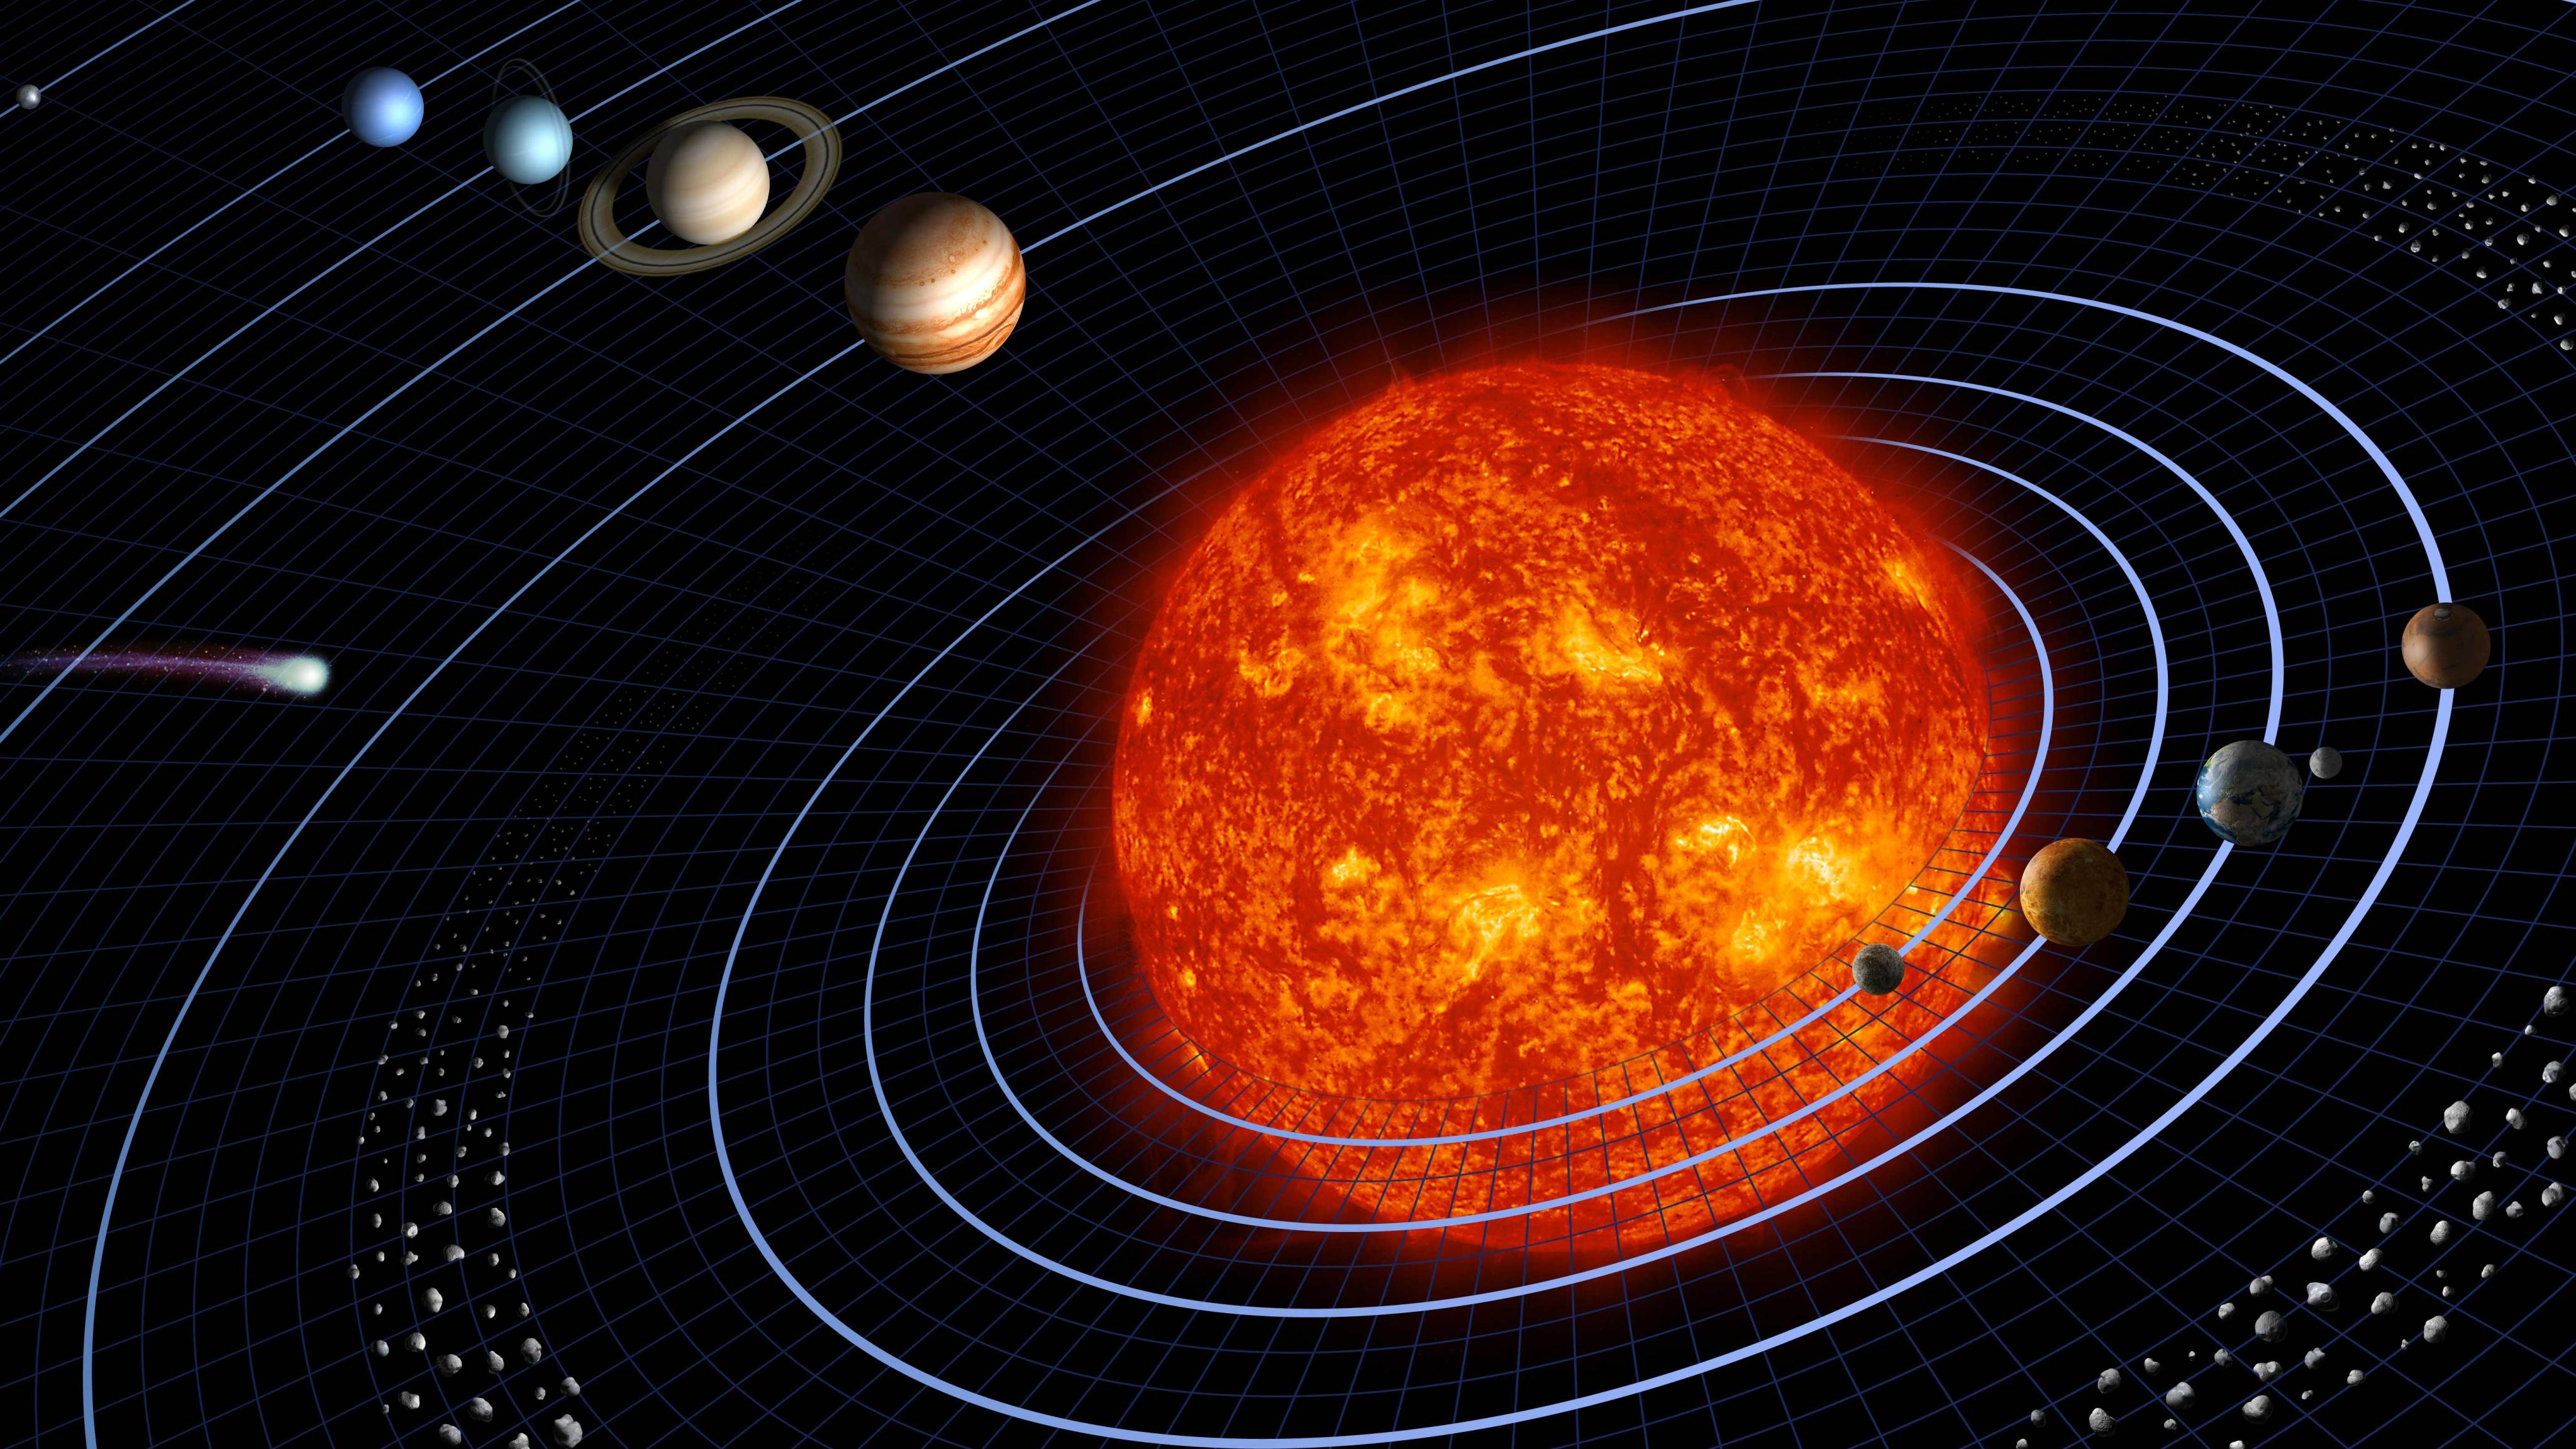 A bright orange sun surrounded by planets of various sizes and colors and circles showing the orbits.